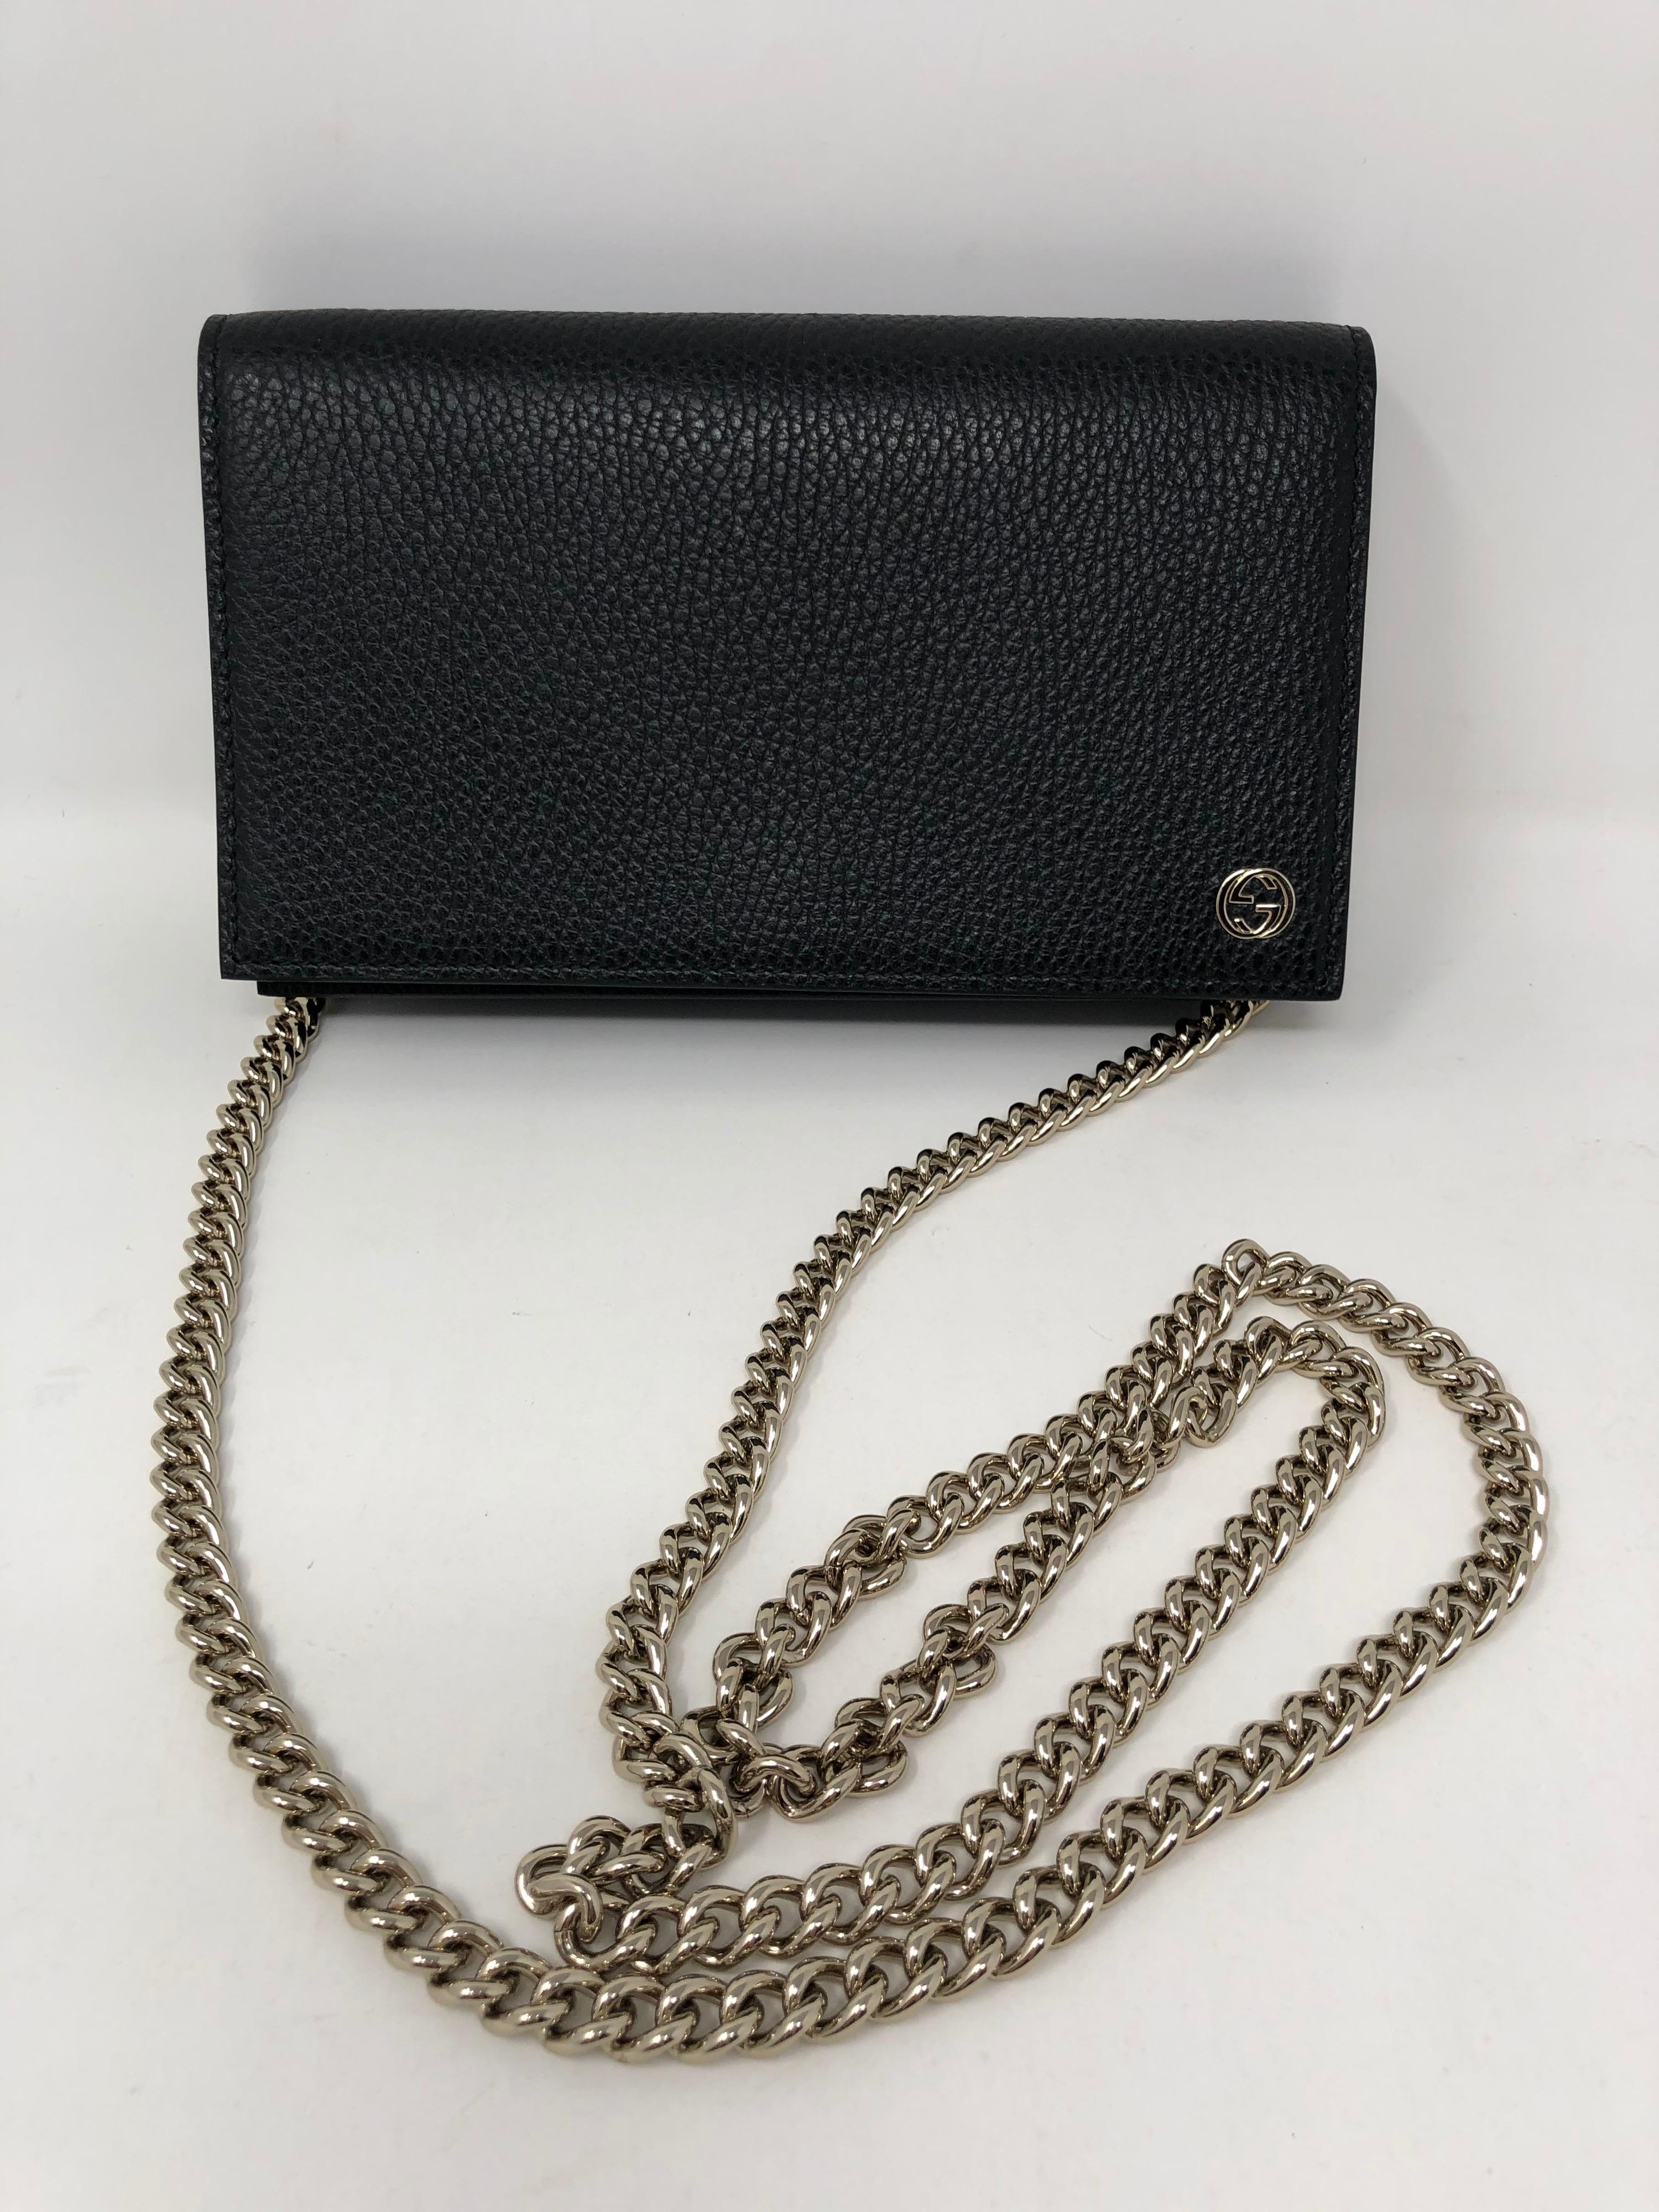 Gucci Black Leather Crossbody Bag. Wallet on a chain style with gold hardware. Like new condition in box. Guaranteed authentic. 